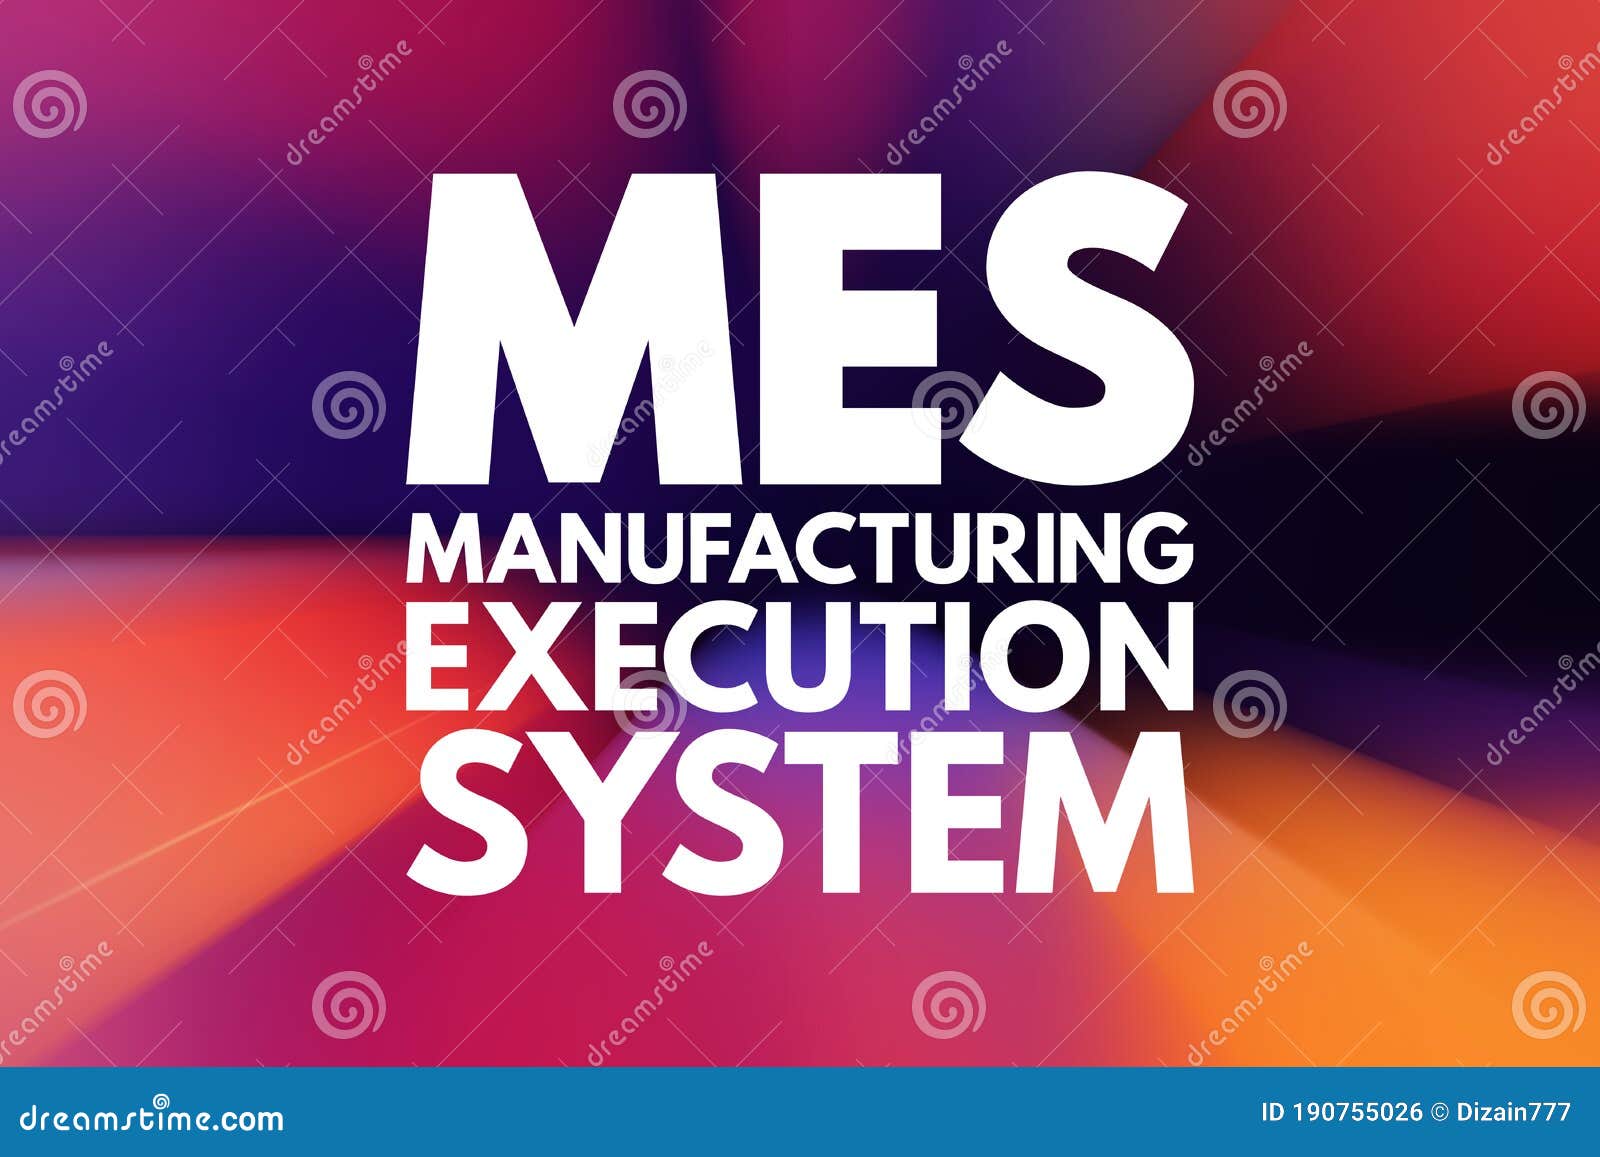 mes - manufacturing execution system acronym, business concept background